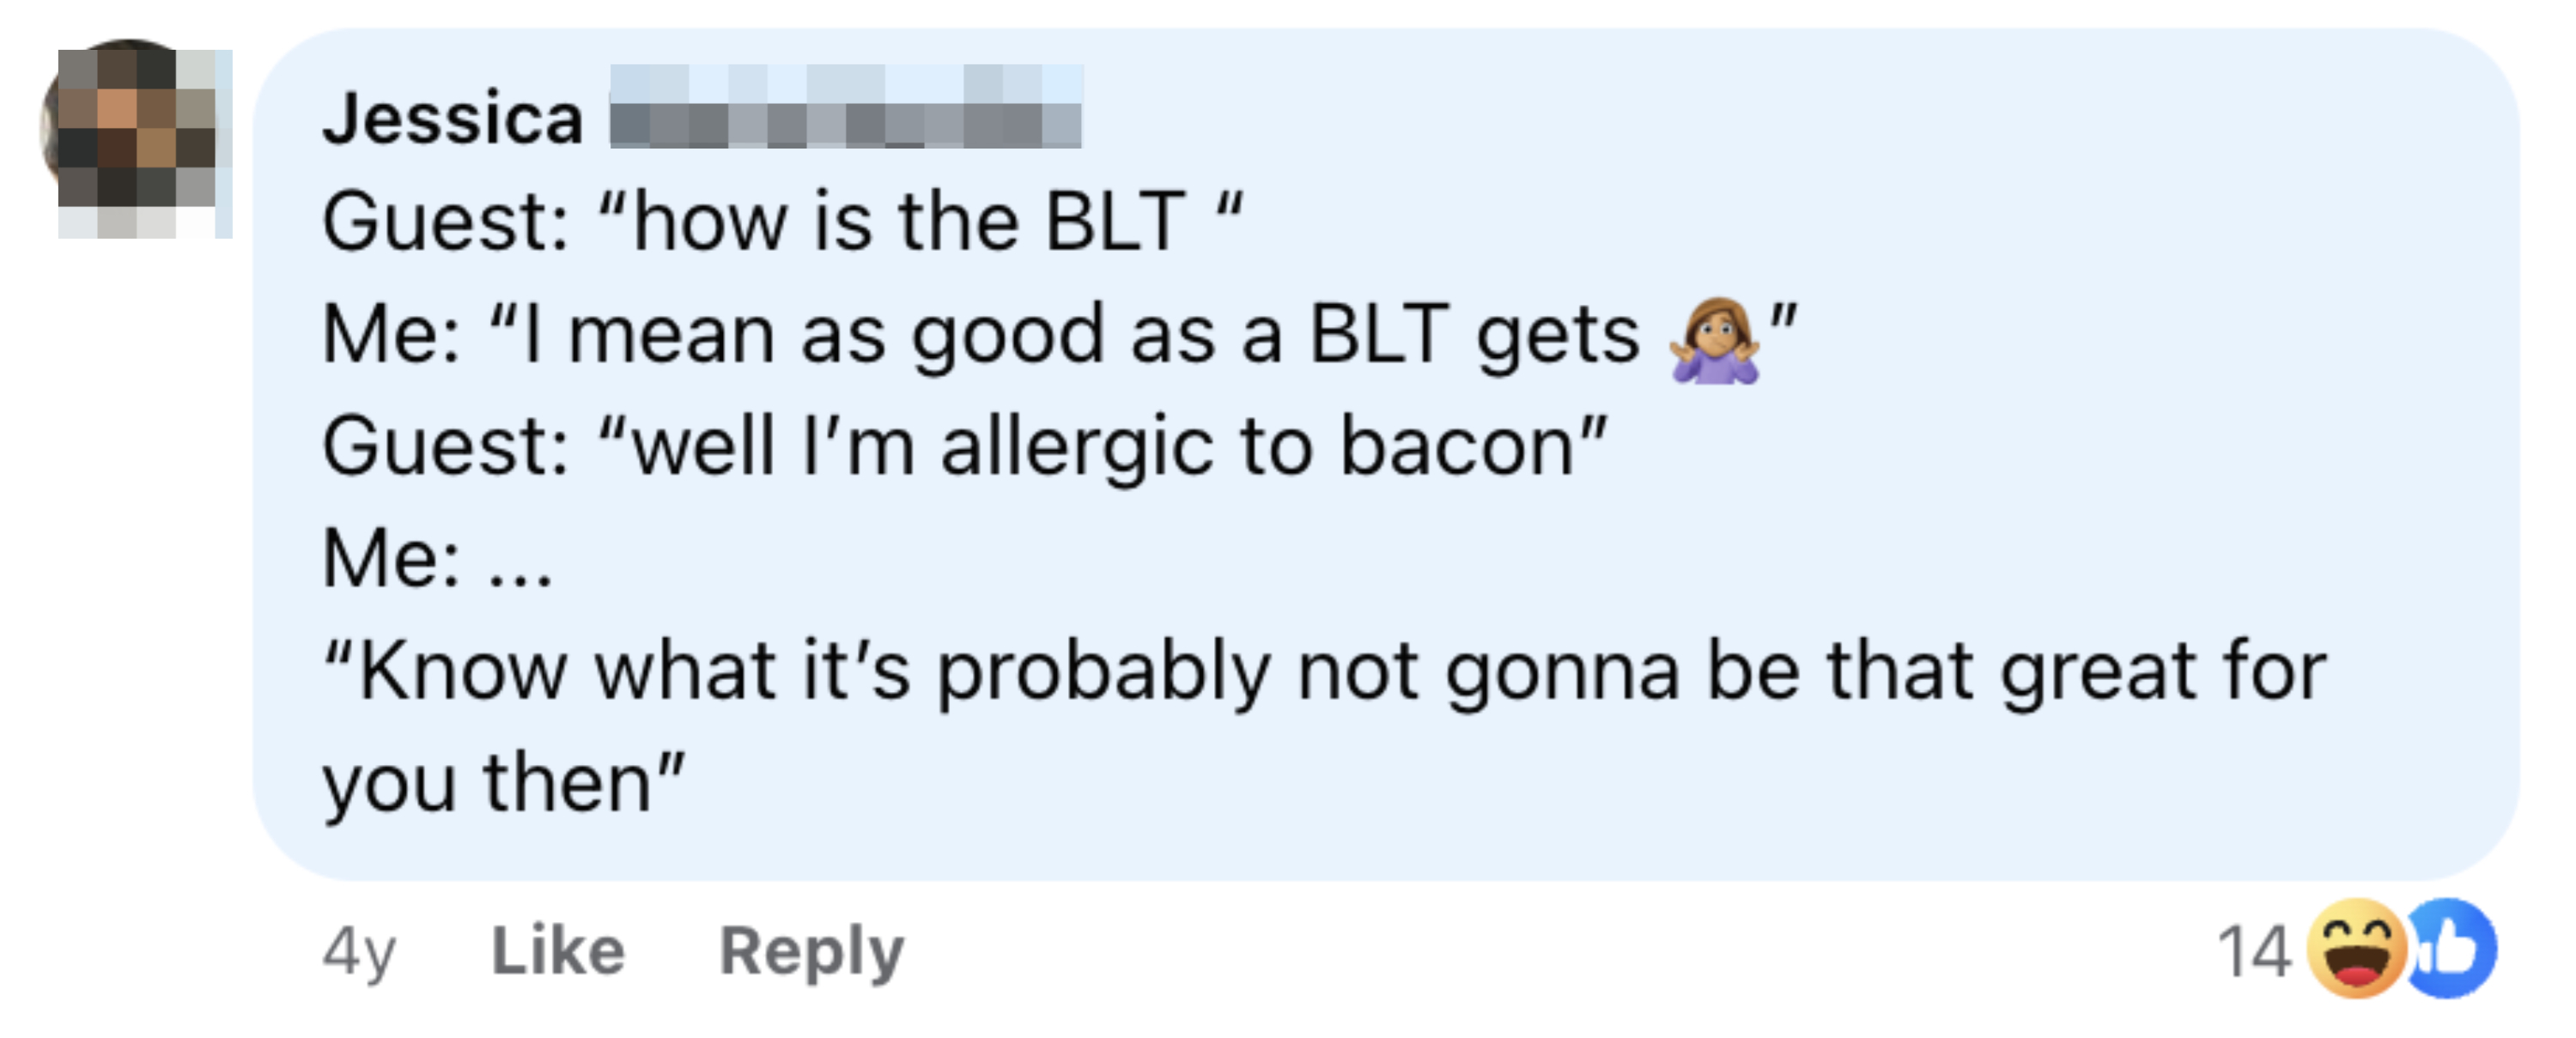 Conversation about a BLT, one person is allergic to bacon, implying the food won&#x27;t be great for them